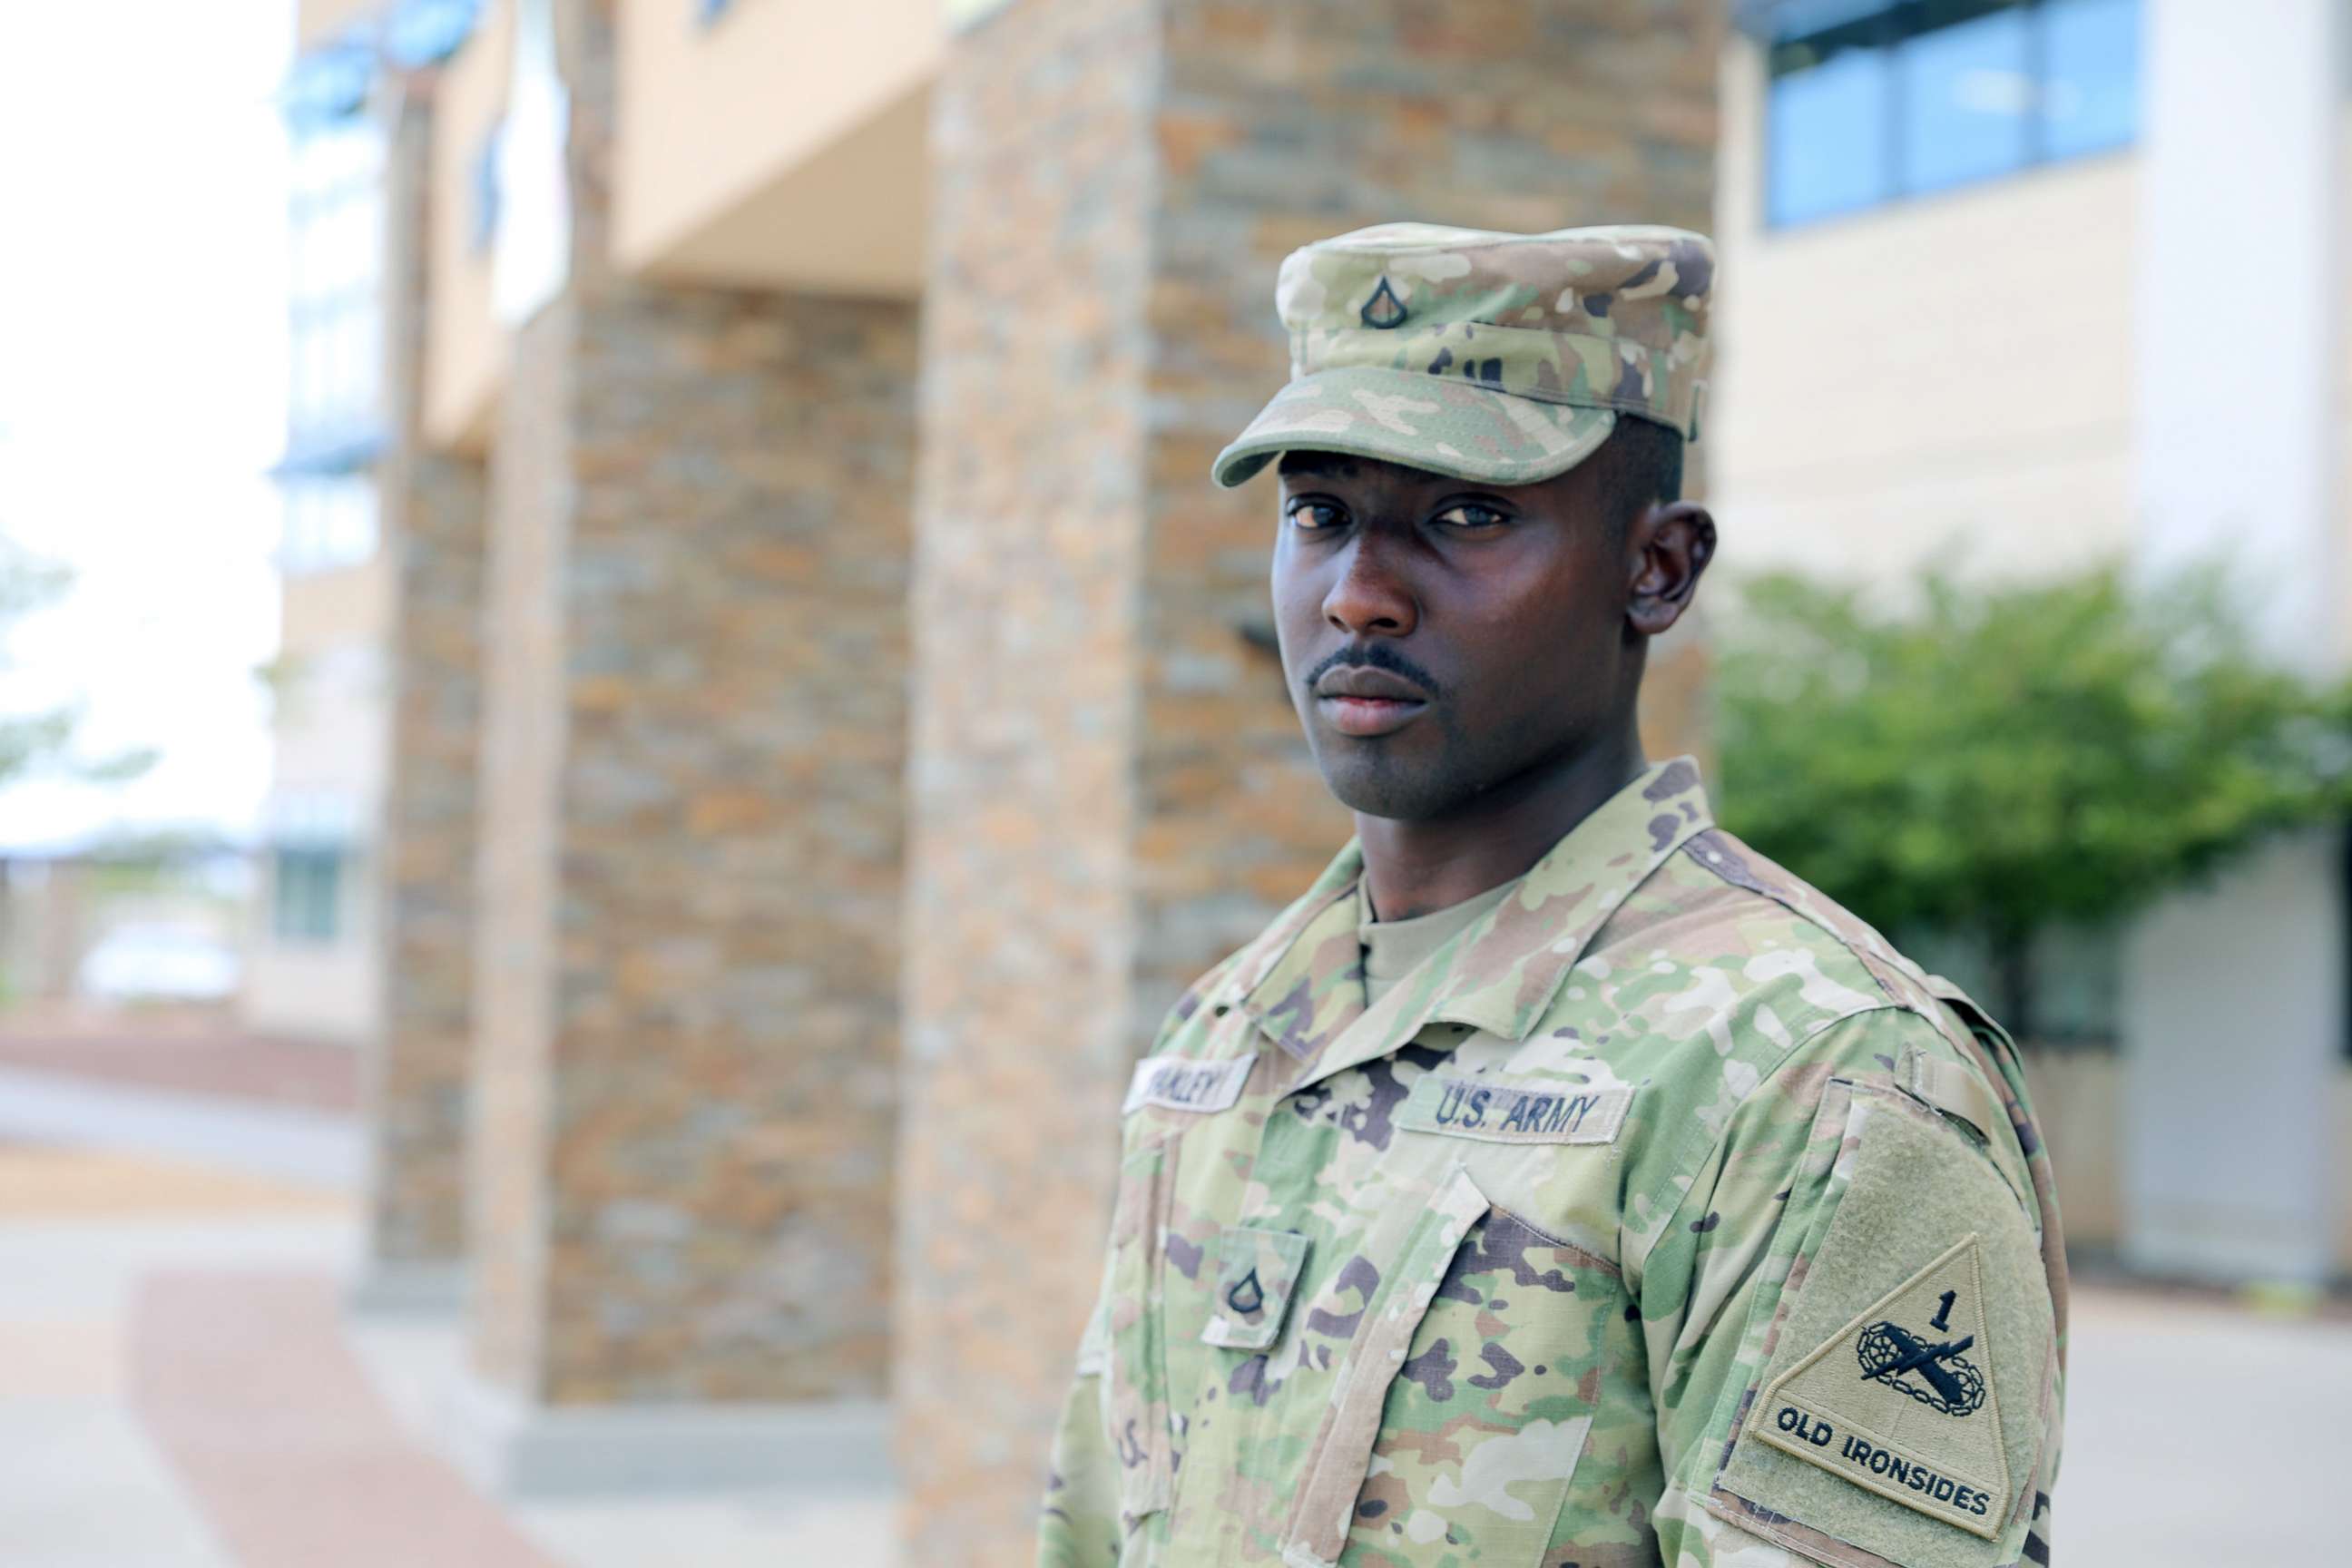 PHOTO: Pfc. Glendon Oakley, a native of Killeen, Texas and an automated logistical specialist in the U.S. Army assigned to Fort Bliss, helped children to safety during the mass shooting at a Walmart in El Paso, Texas, August 3, 2019.